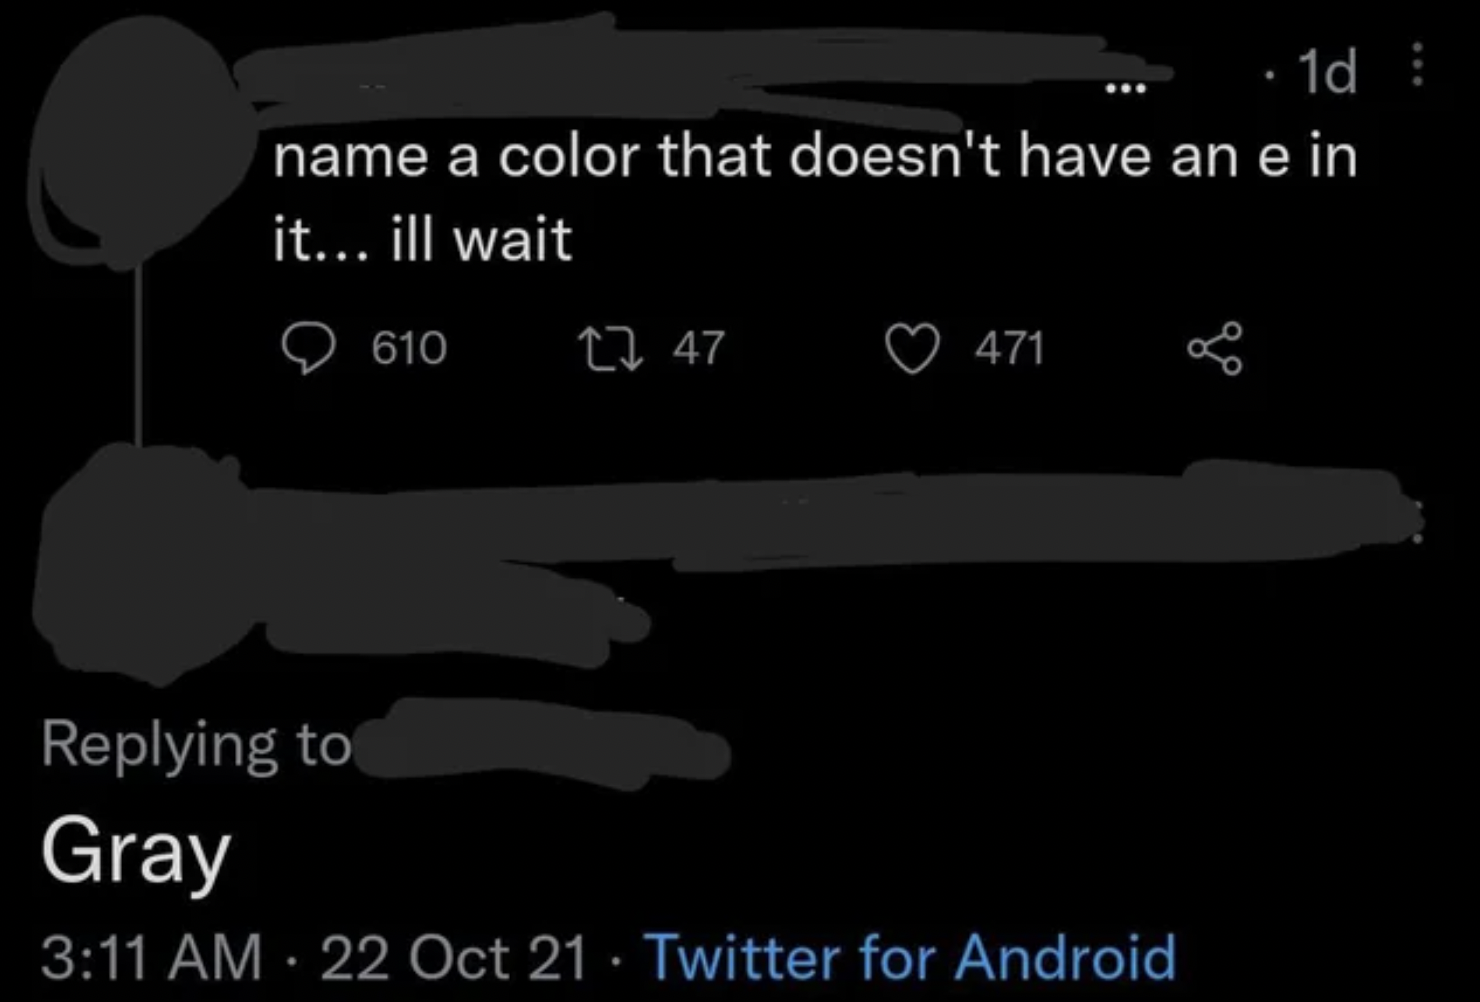 Dumb pics - Internet meme - 1d name a color that doesn't have an e in it... ill wait 610 247 471 Gray 22 Oct 21 Twitter for Android